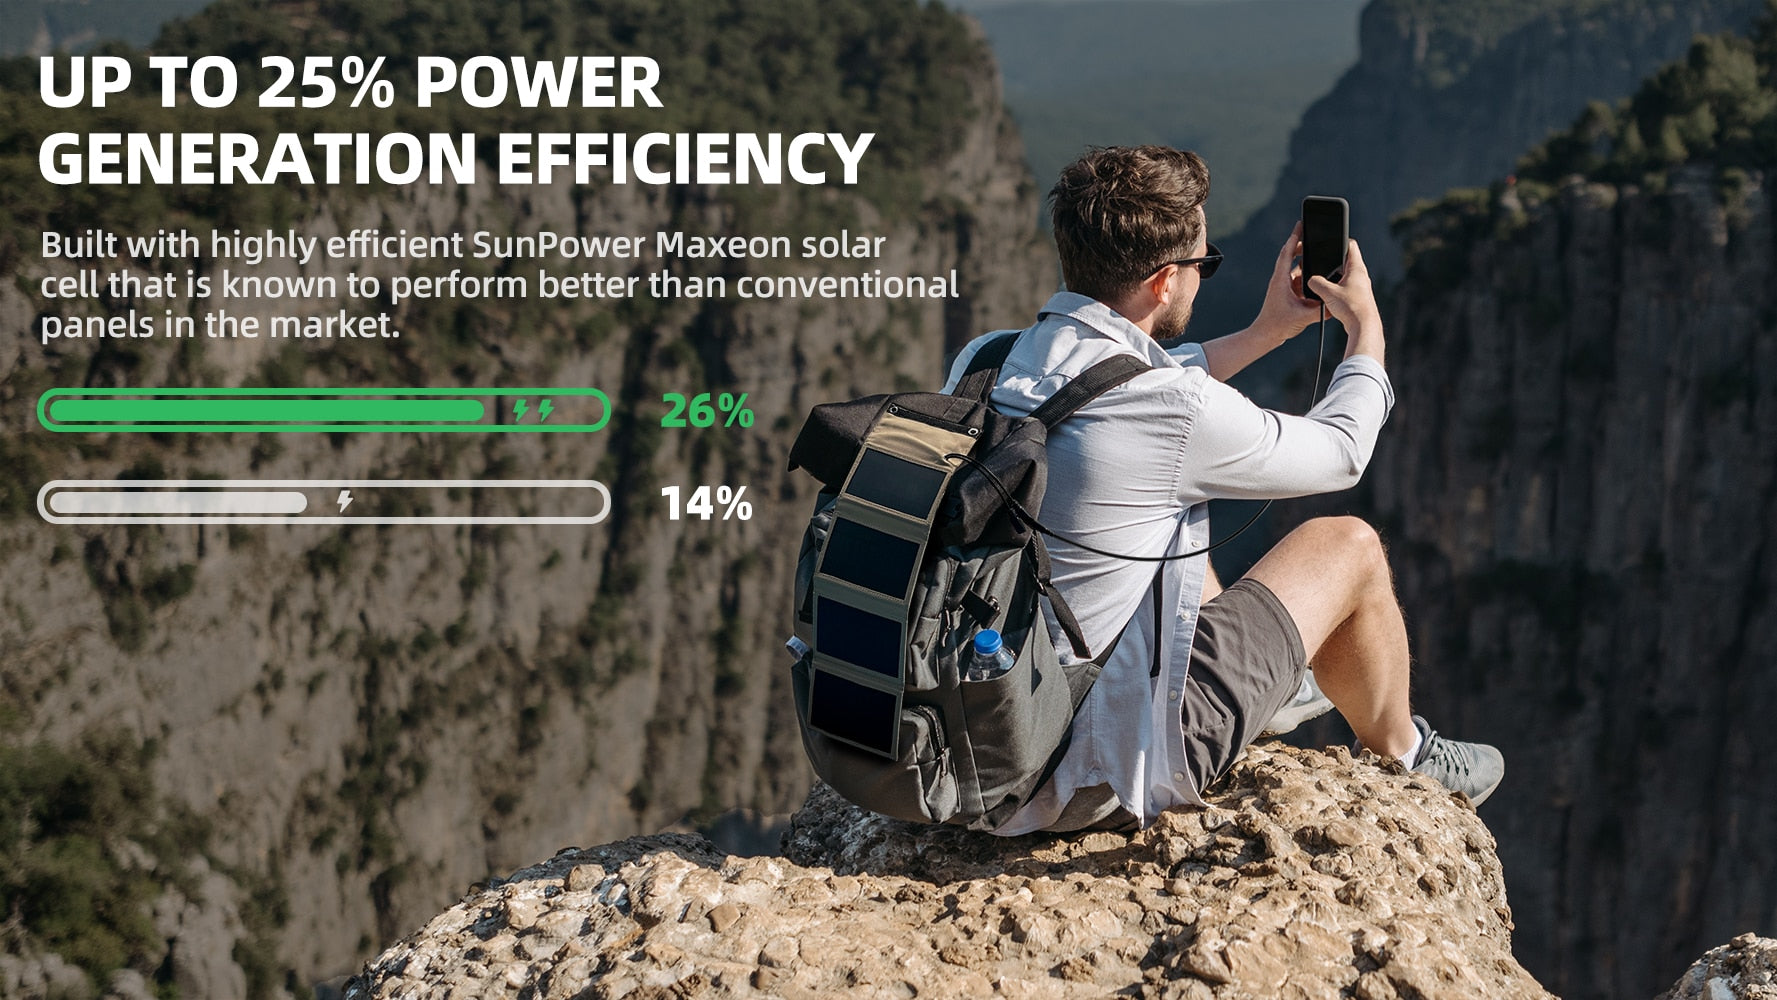 UP TO 25% POWER GENERATION EFFICIEN